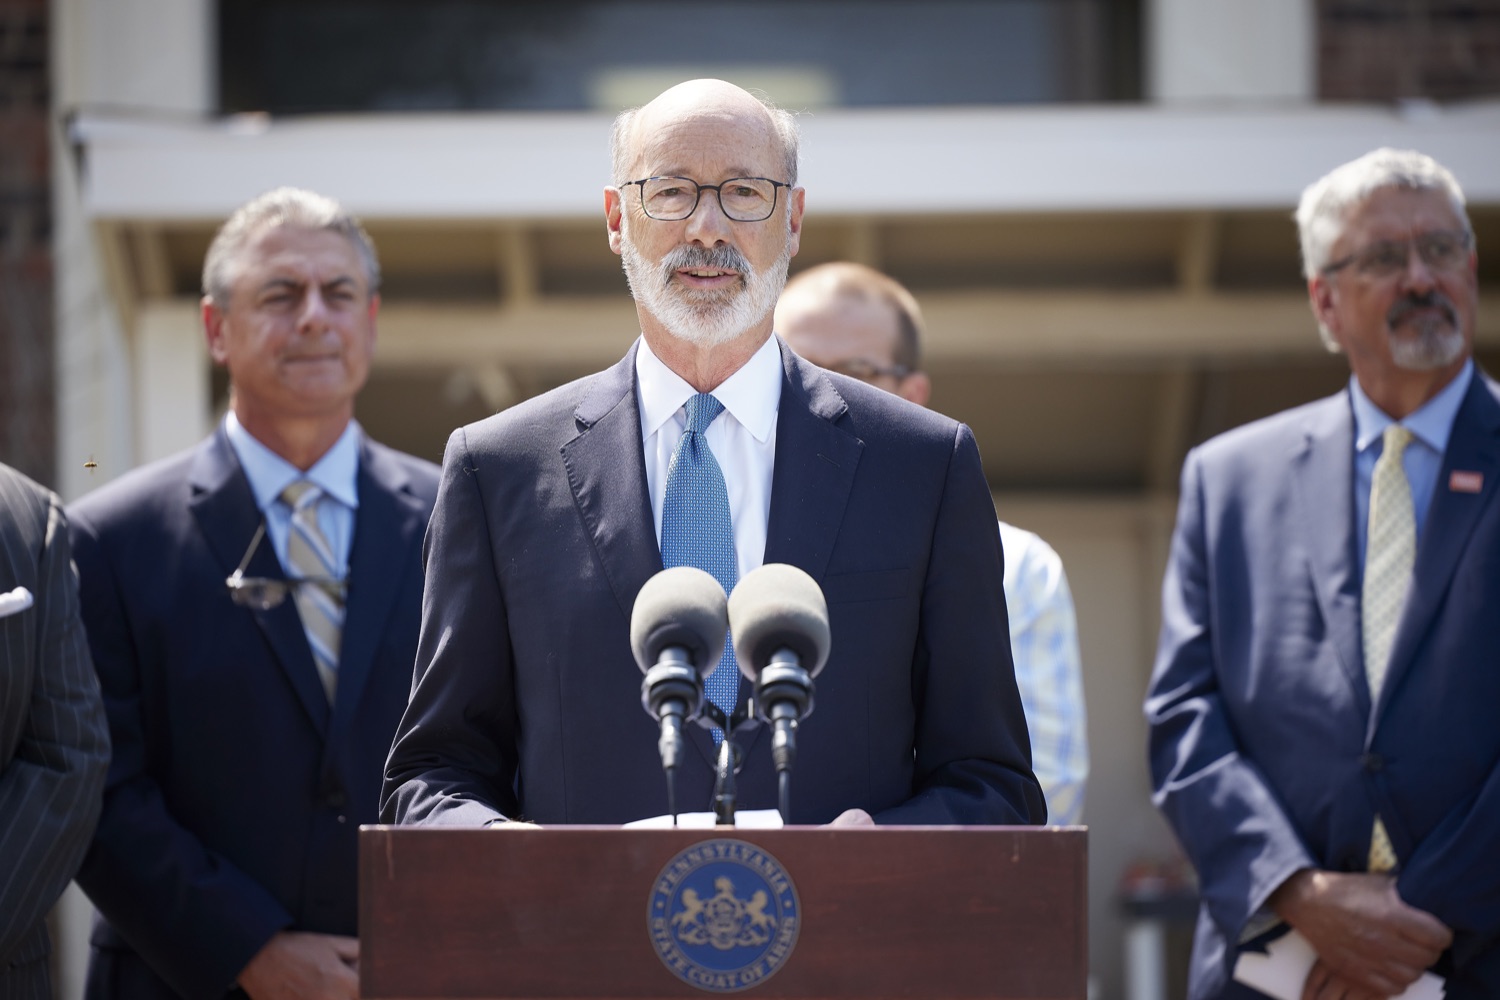 Pennsylvania Governor Tom Wolf speaks with the press.   Governor Tom Wolf was joined by state Representative David Delloso and stakeholders and community members to discuss the reintroduction of the PA Opportunity Program, which would send $2,000 checks directly to Pennsylvanians. I first proposed the PA Opportunity Program back in February, but Republican leaders in the General Assembly just wouldnt get on board with funding it in this years budget, said Gov. Wolf. However, as Ive traveled the commonwealth, Ive heard directly from so many people about how much this program would mean to them and their families. Im not going to stop fighting until the people of Pennsylvania get the help they need and deserve. Folcroft, PA  August 2, 2022<br><a href="https://filesource.amperwave.net/commonwealthofpa/photo/22070_gov_opportunityFund_dz_015.JPG" target="_blank">⇣ Download Photo</a>